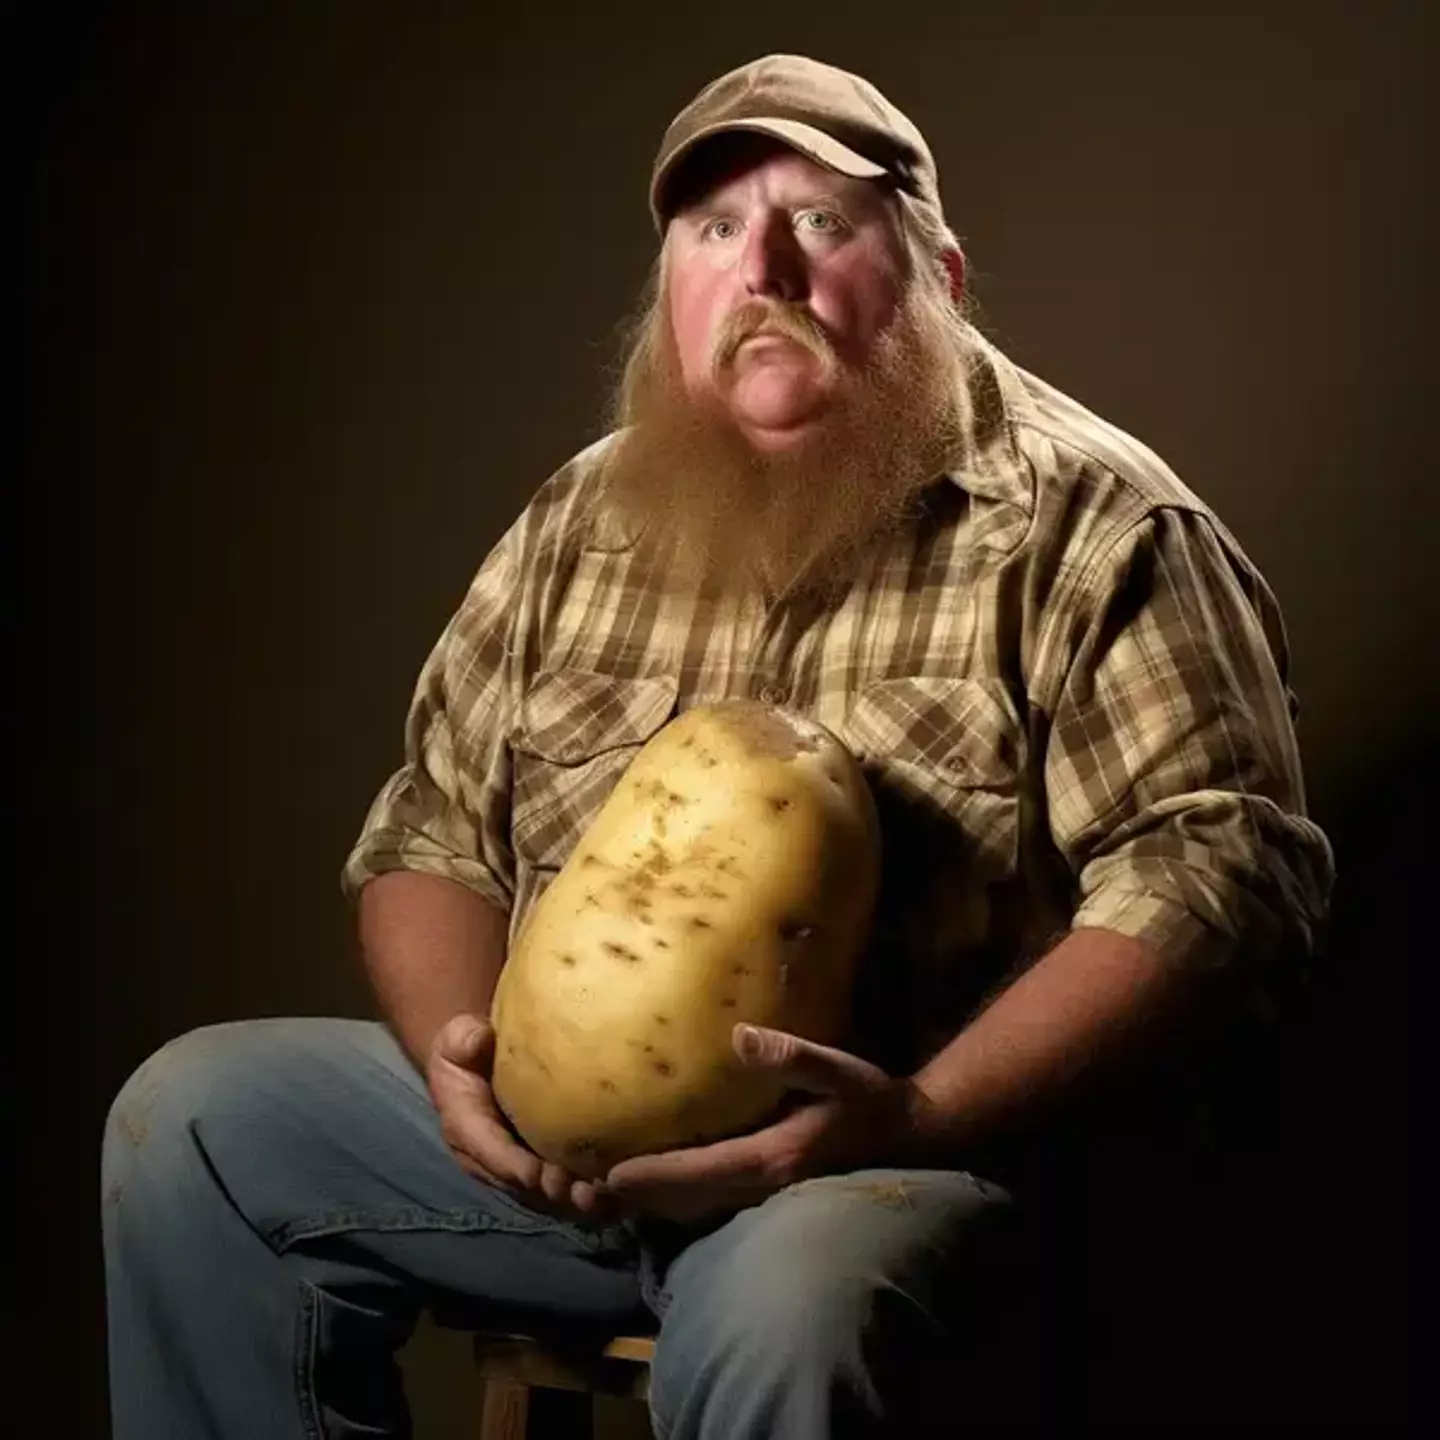 That's a pretty big spud you got there, bud.